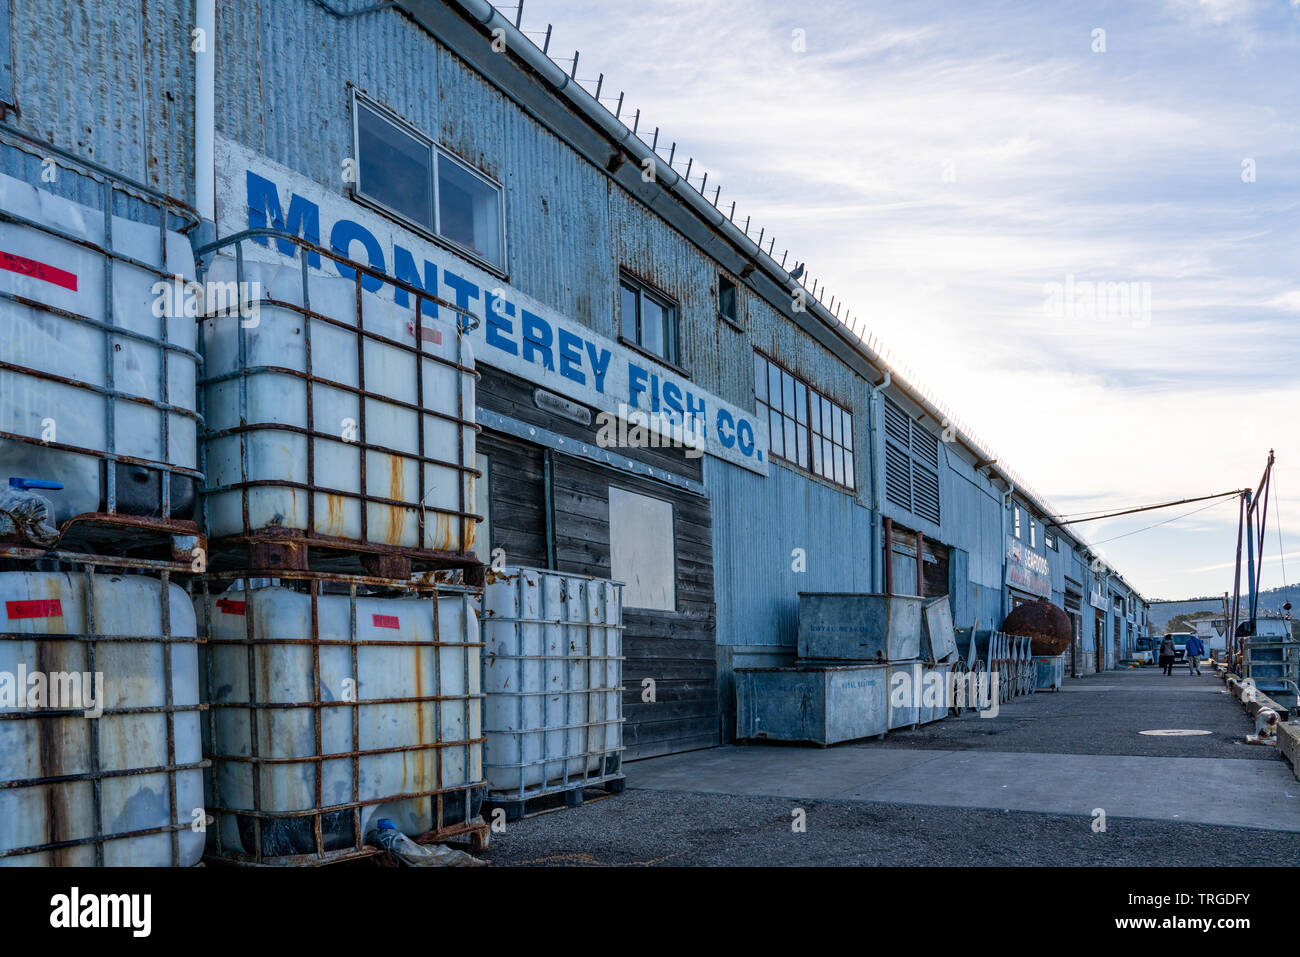 Old rusty containers stacked on the side of the Monterey Fish Company Building along the Pier in Monterey Bay, California. Stock Photo